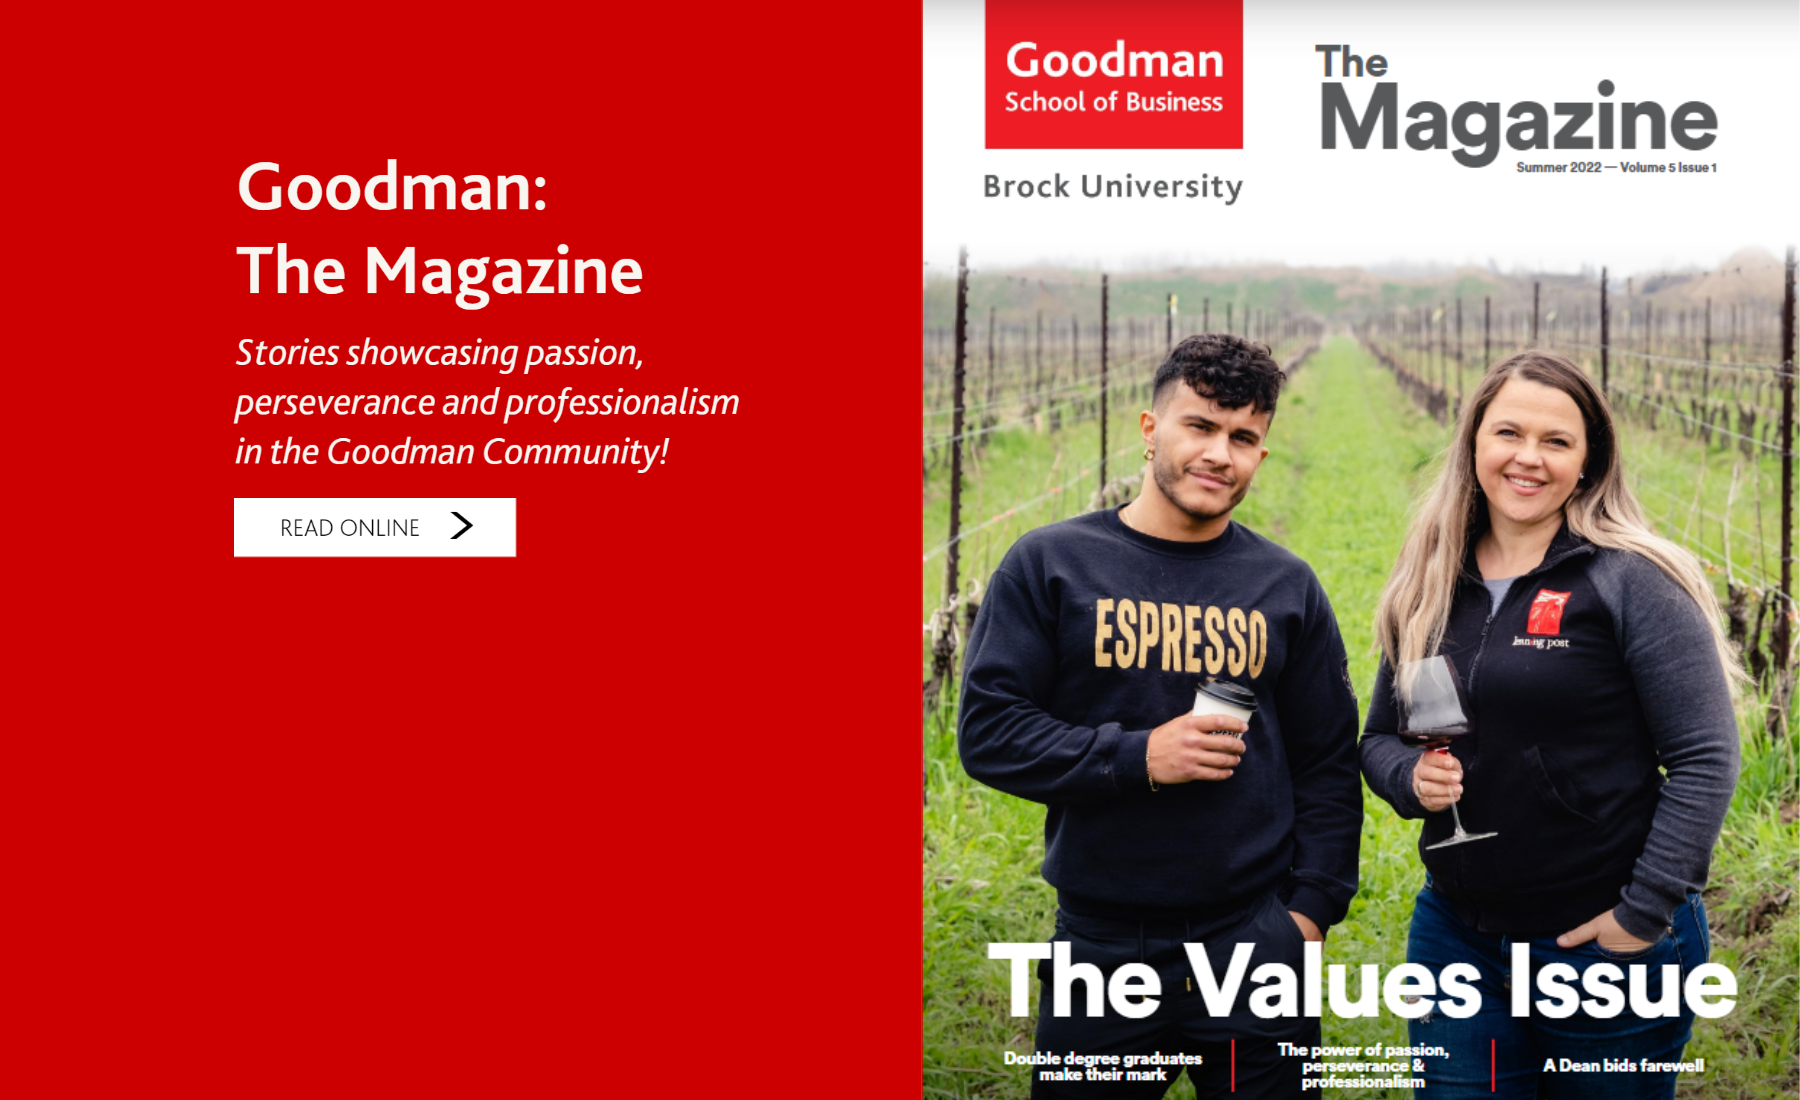 Stories showcasing passion, perseverance and professionalism in the Goodman Community! 